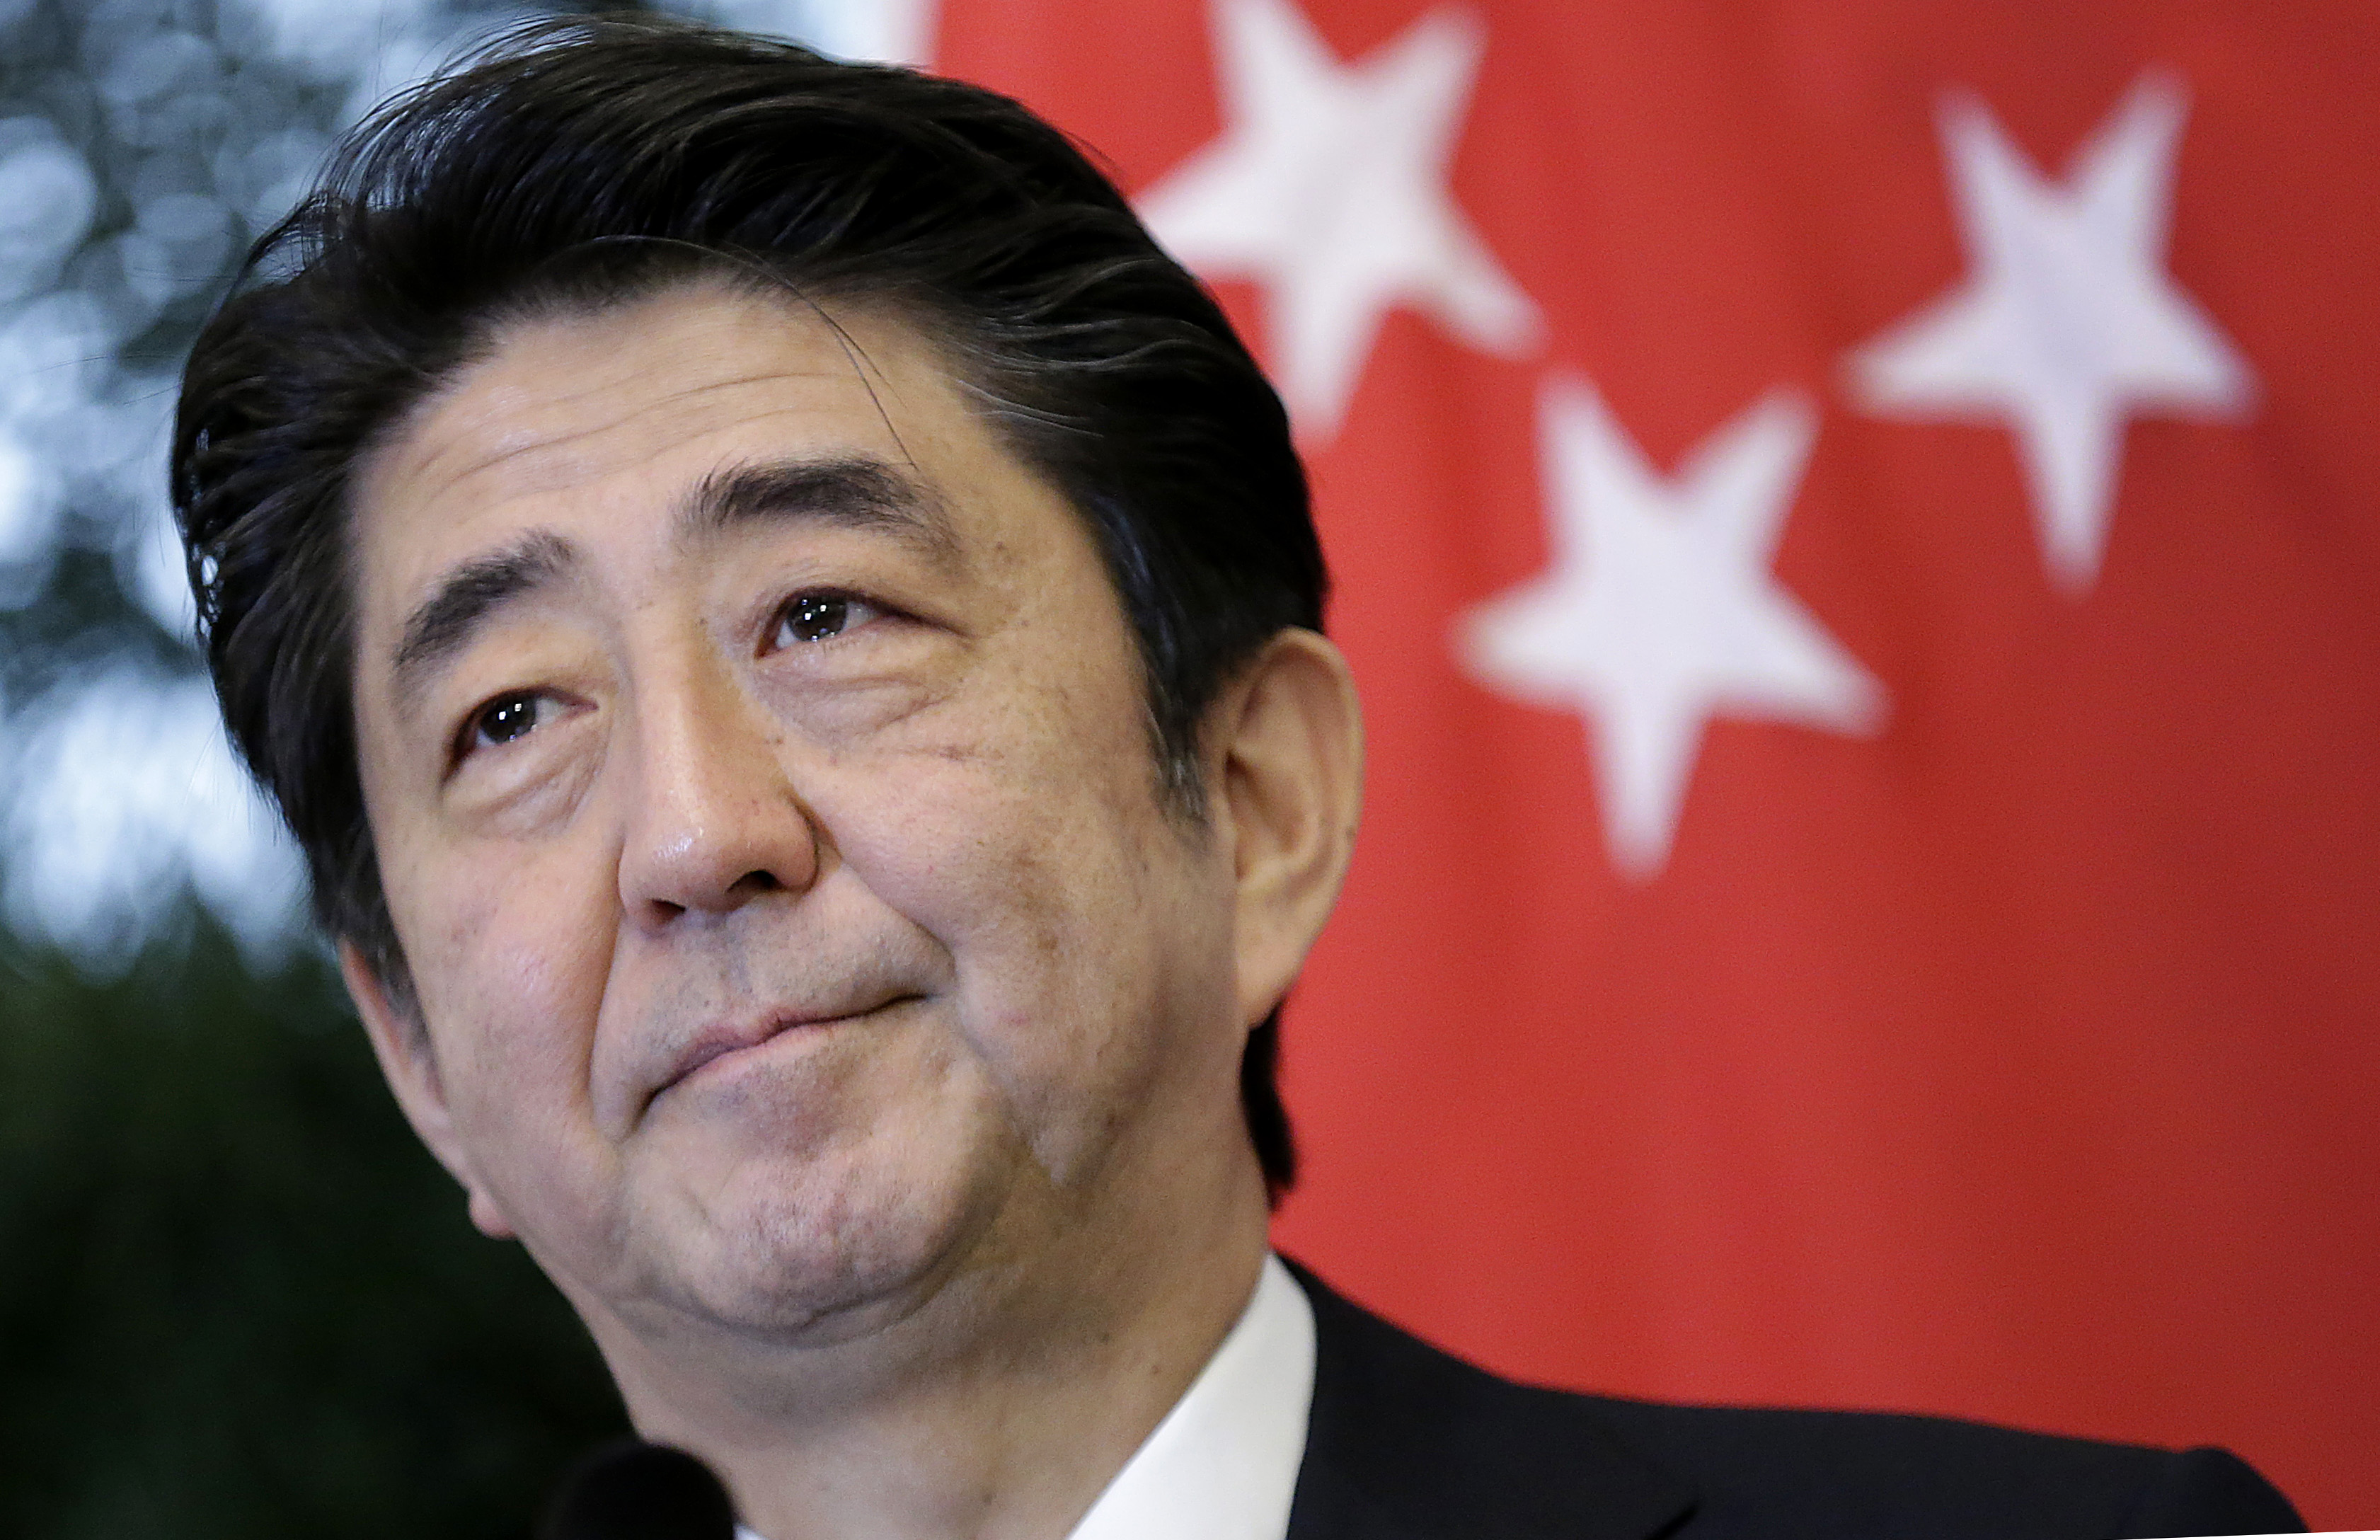 Japan Prime Minister Shinzo Abe says Japan stands for the rule of law